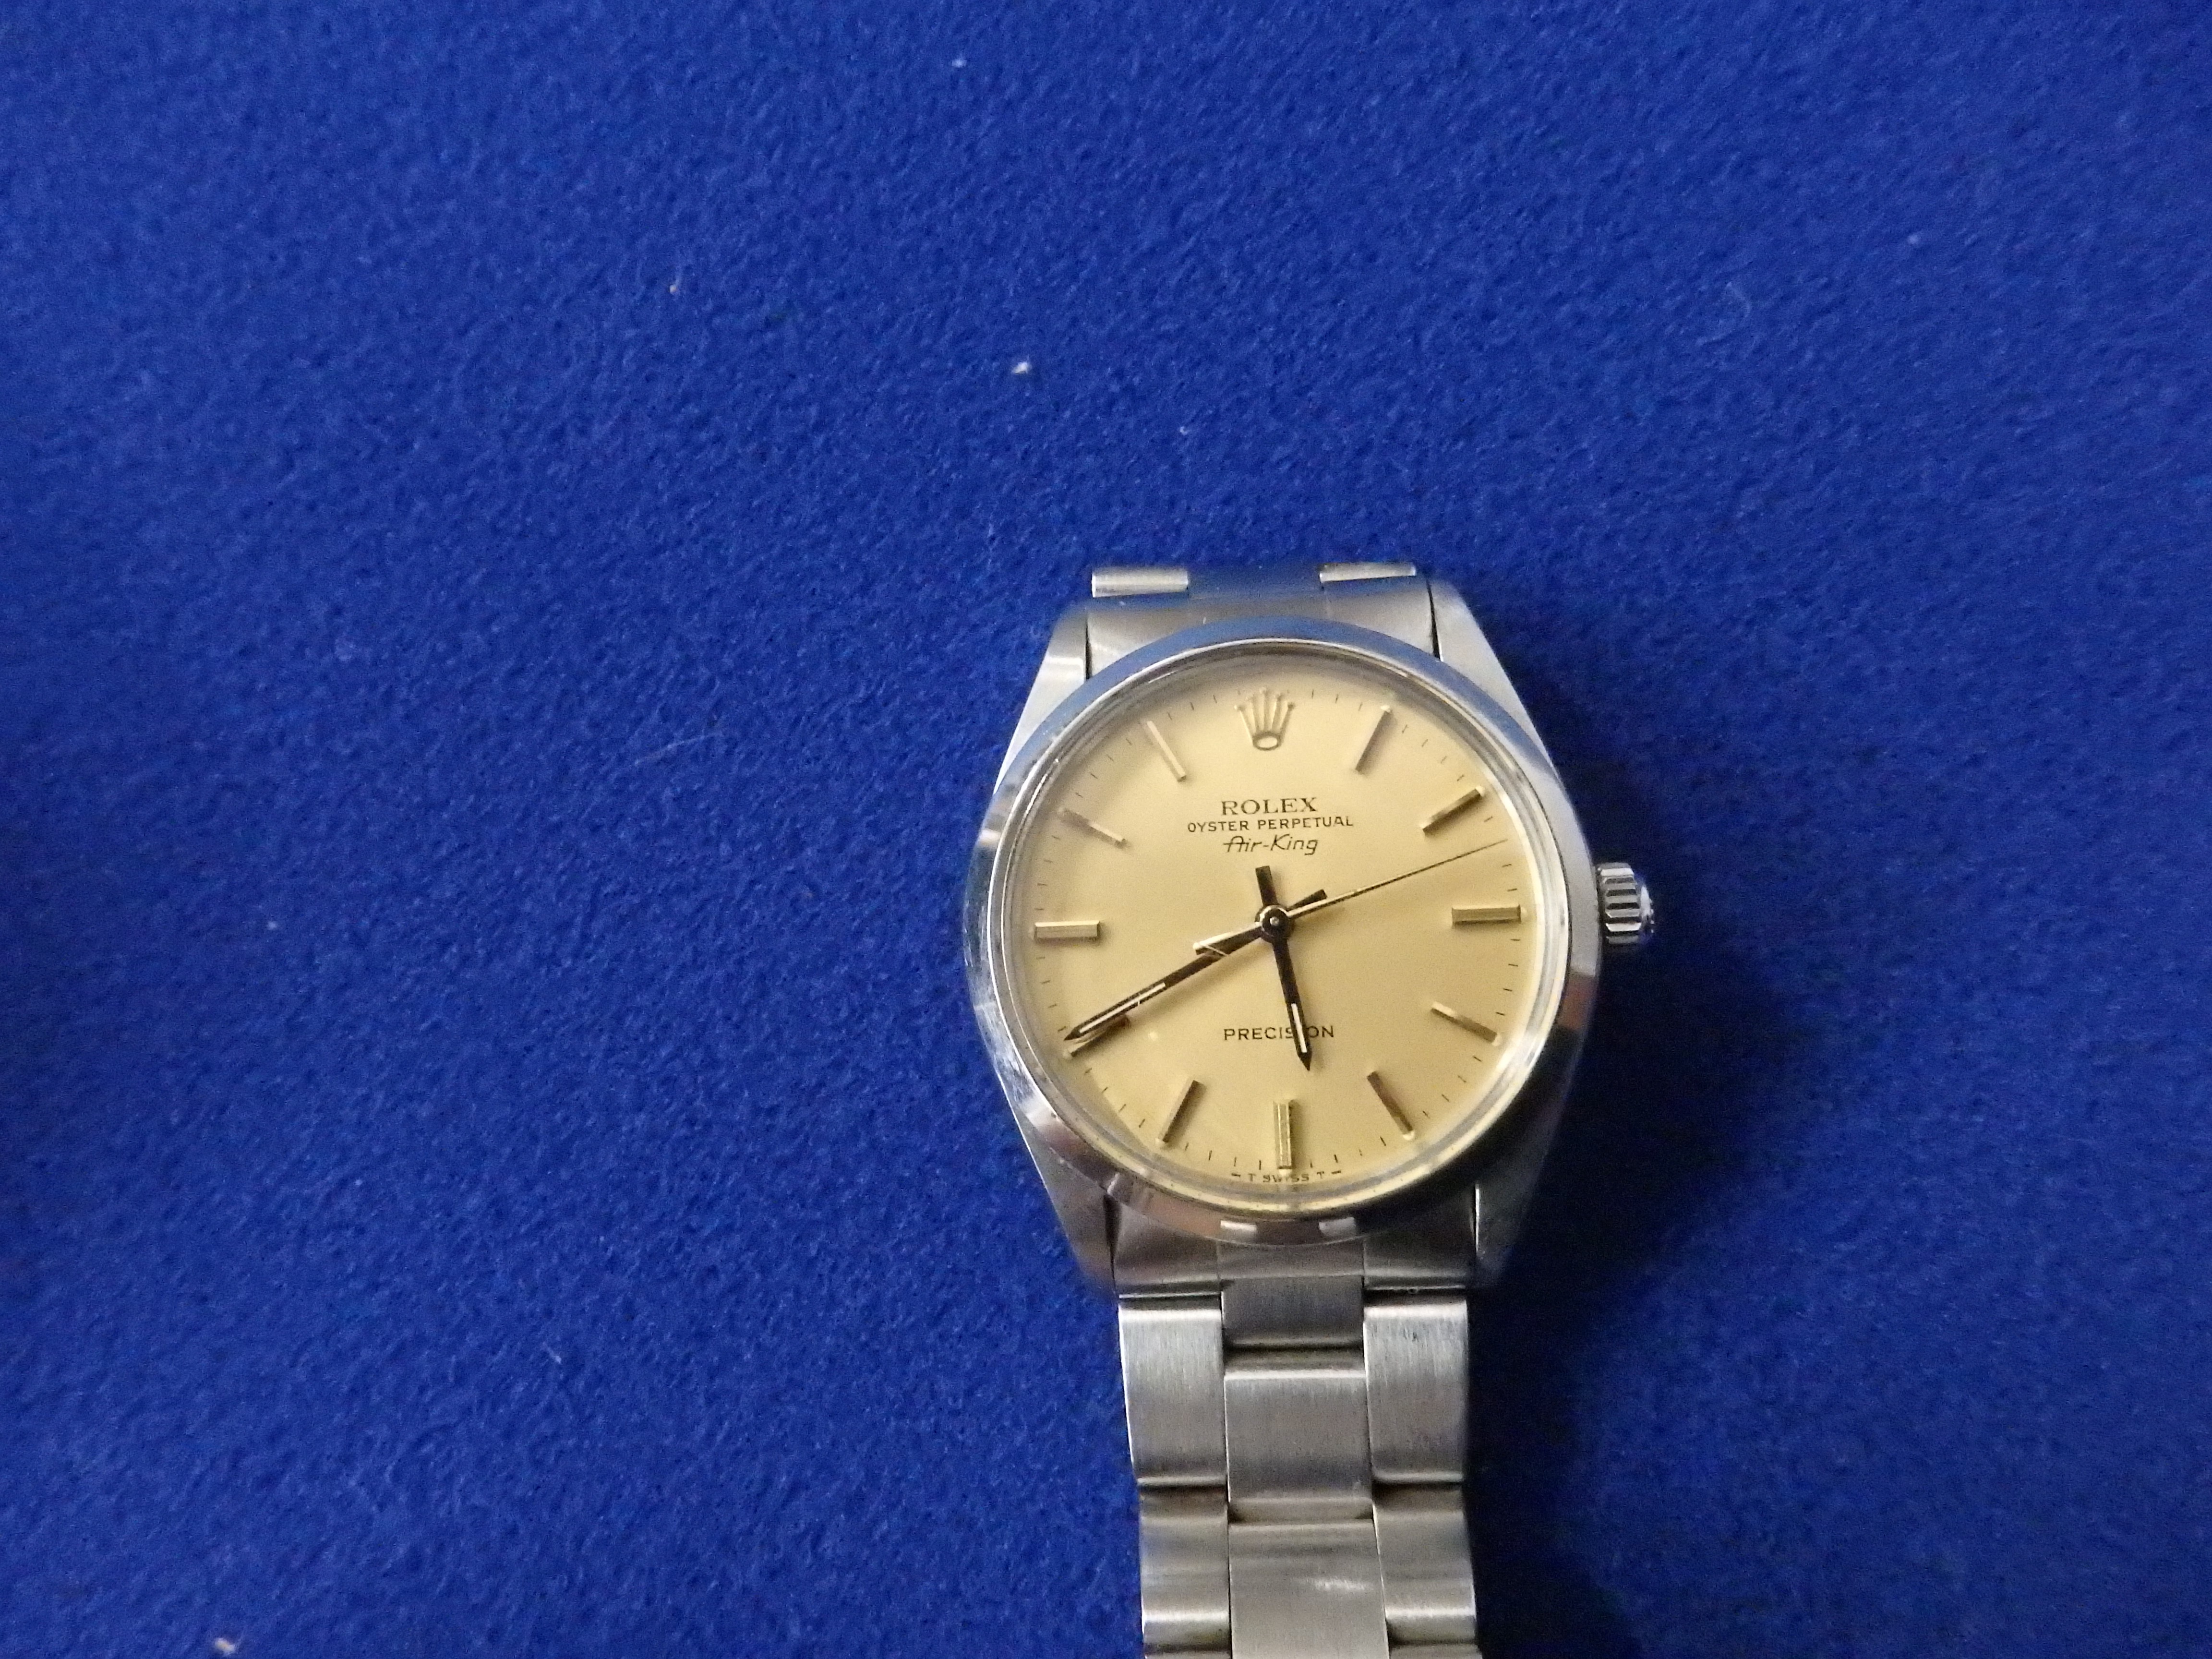 Gents Rolex Oyster Air King watch date purchased sept 1981 - Image 2 of 8